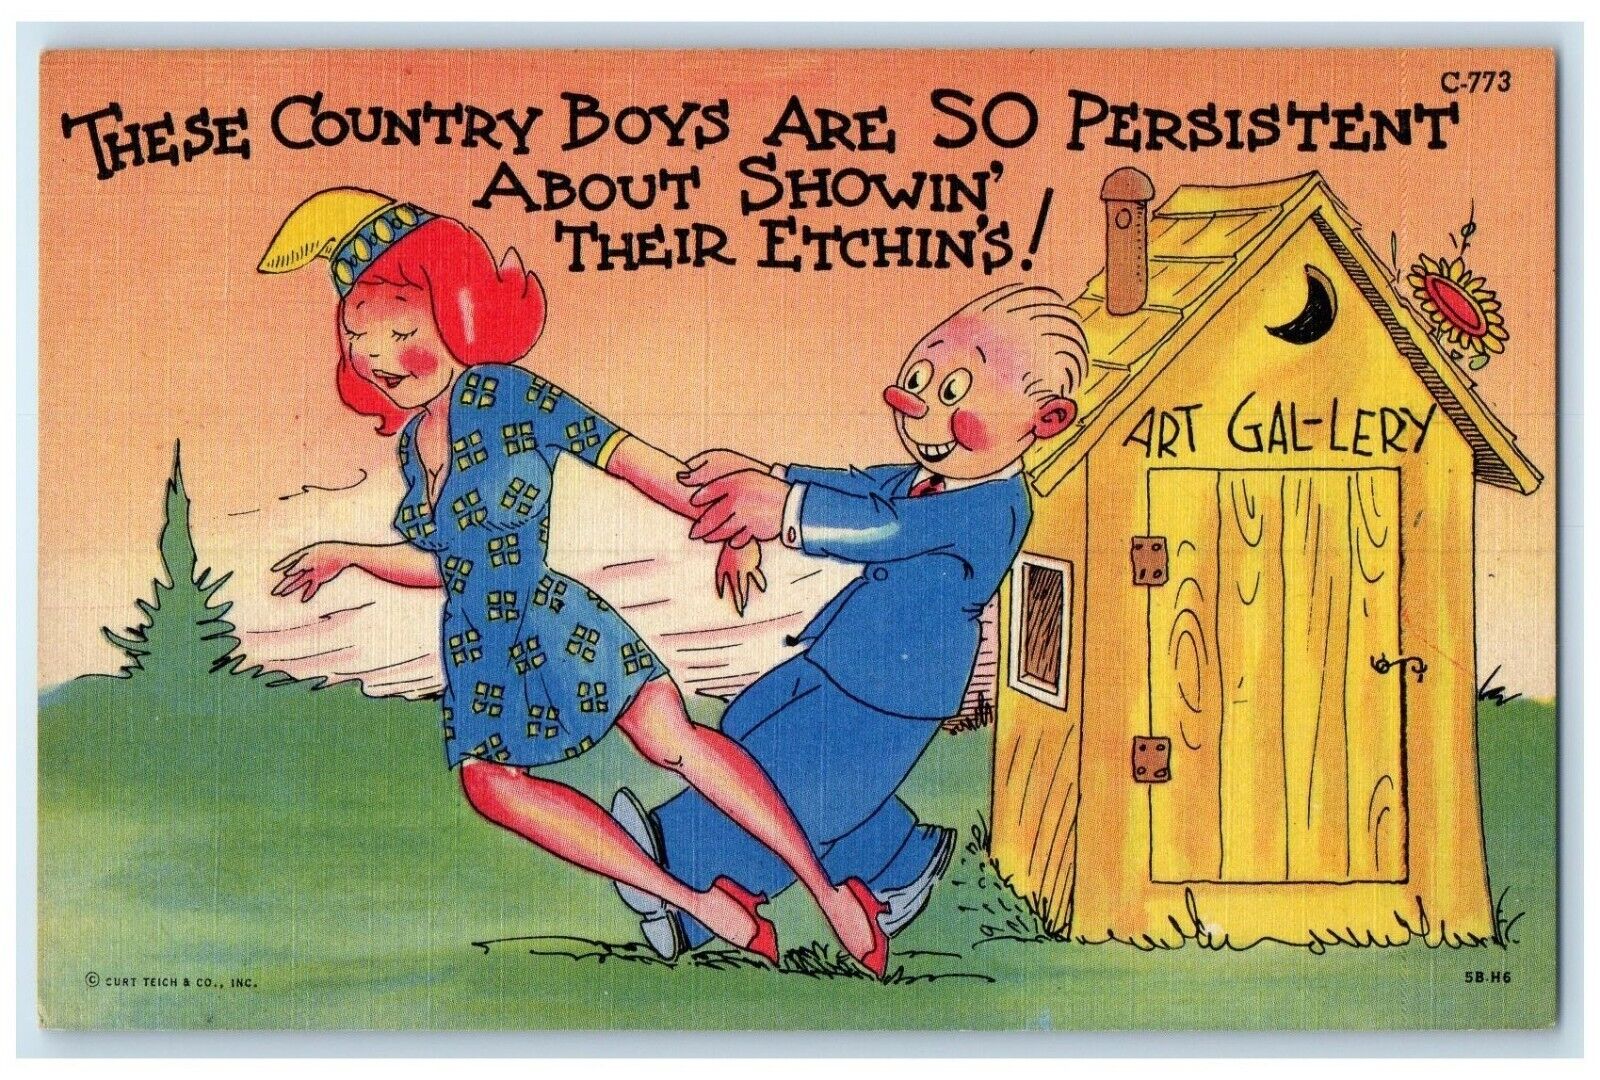 c1930's Man Pulling Woman Art Gallery Boys Are So Persistent Vintage Postcard